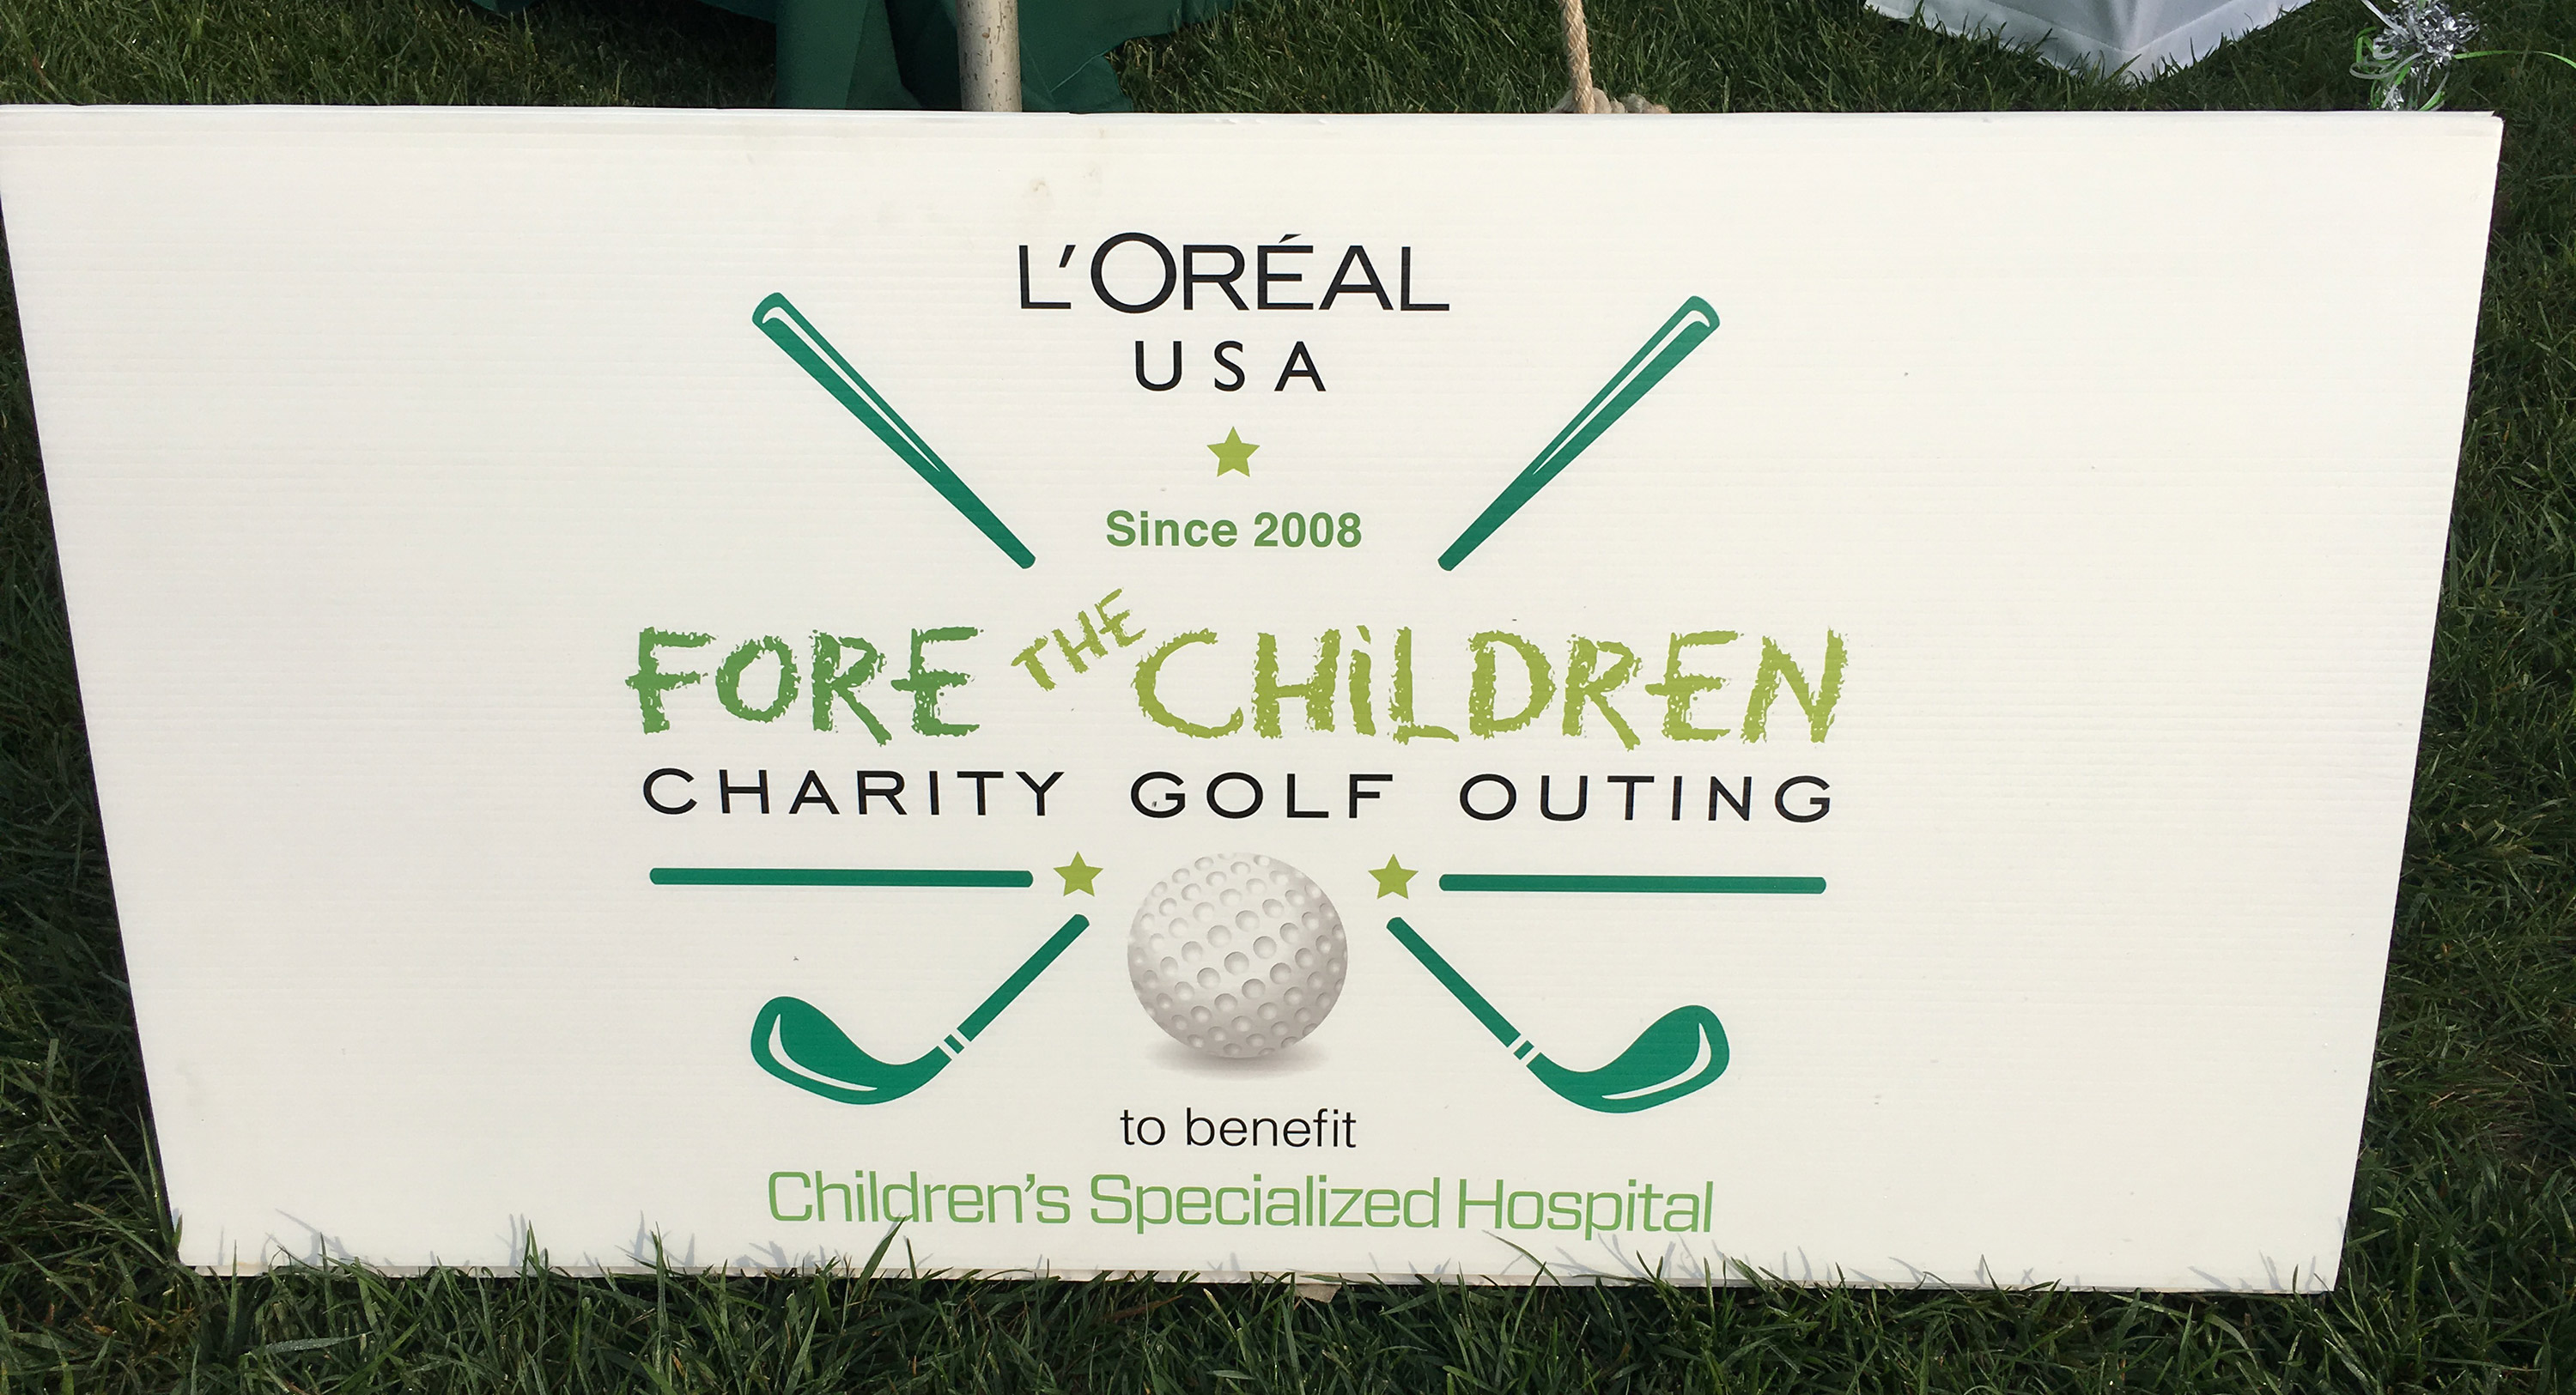 VISEO at the l'Oréal charity golf for the Children